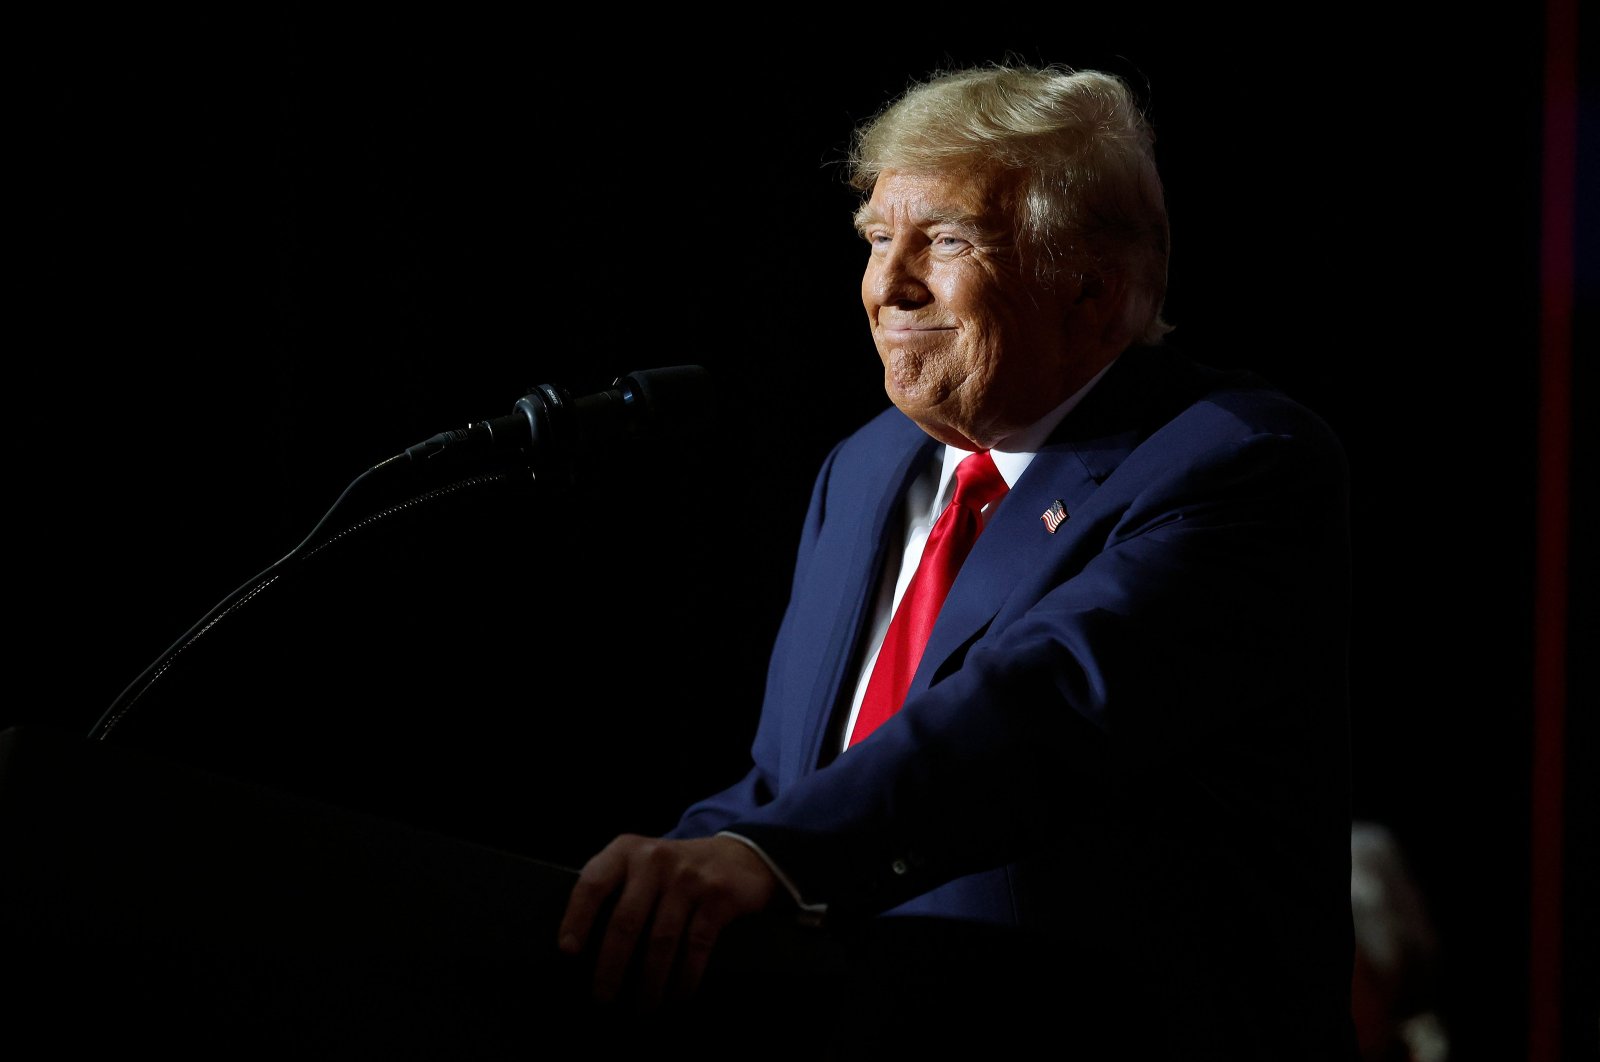 Republican presidential candidate, former U.S. President Donald Trump speaks during his caucus night event in Iowa, India, Jan. 15, 2024. (AFP Photo)